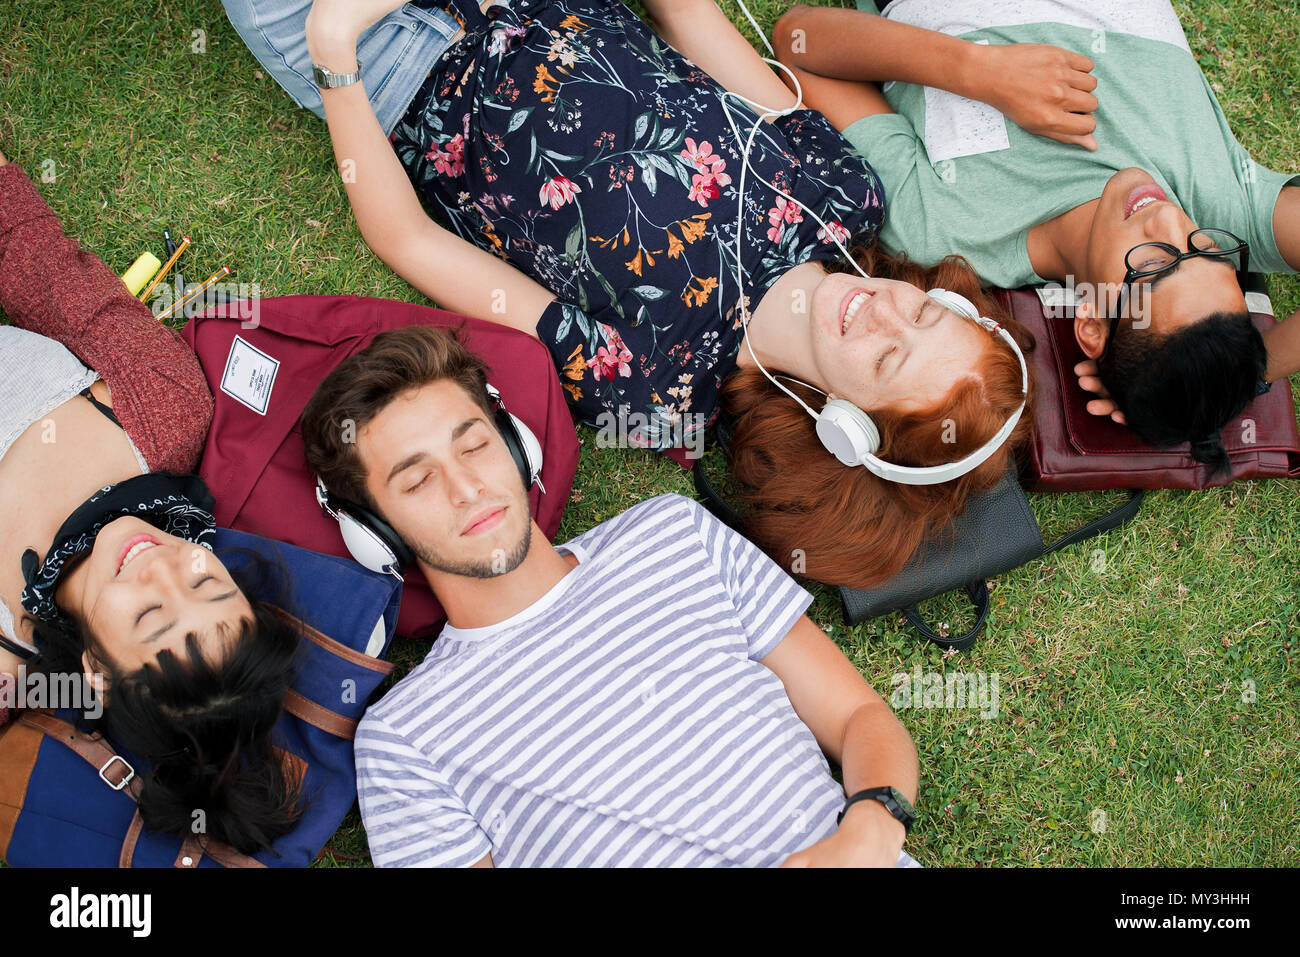 Friends relaxing together on lawn Stock Photo